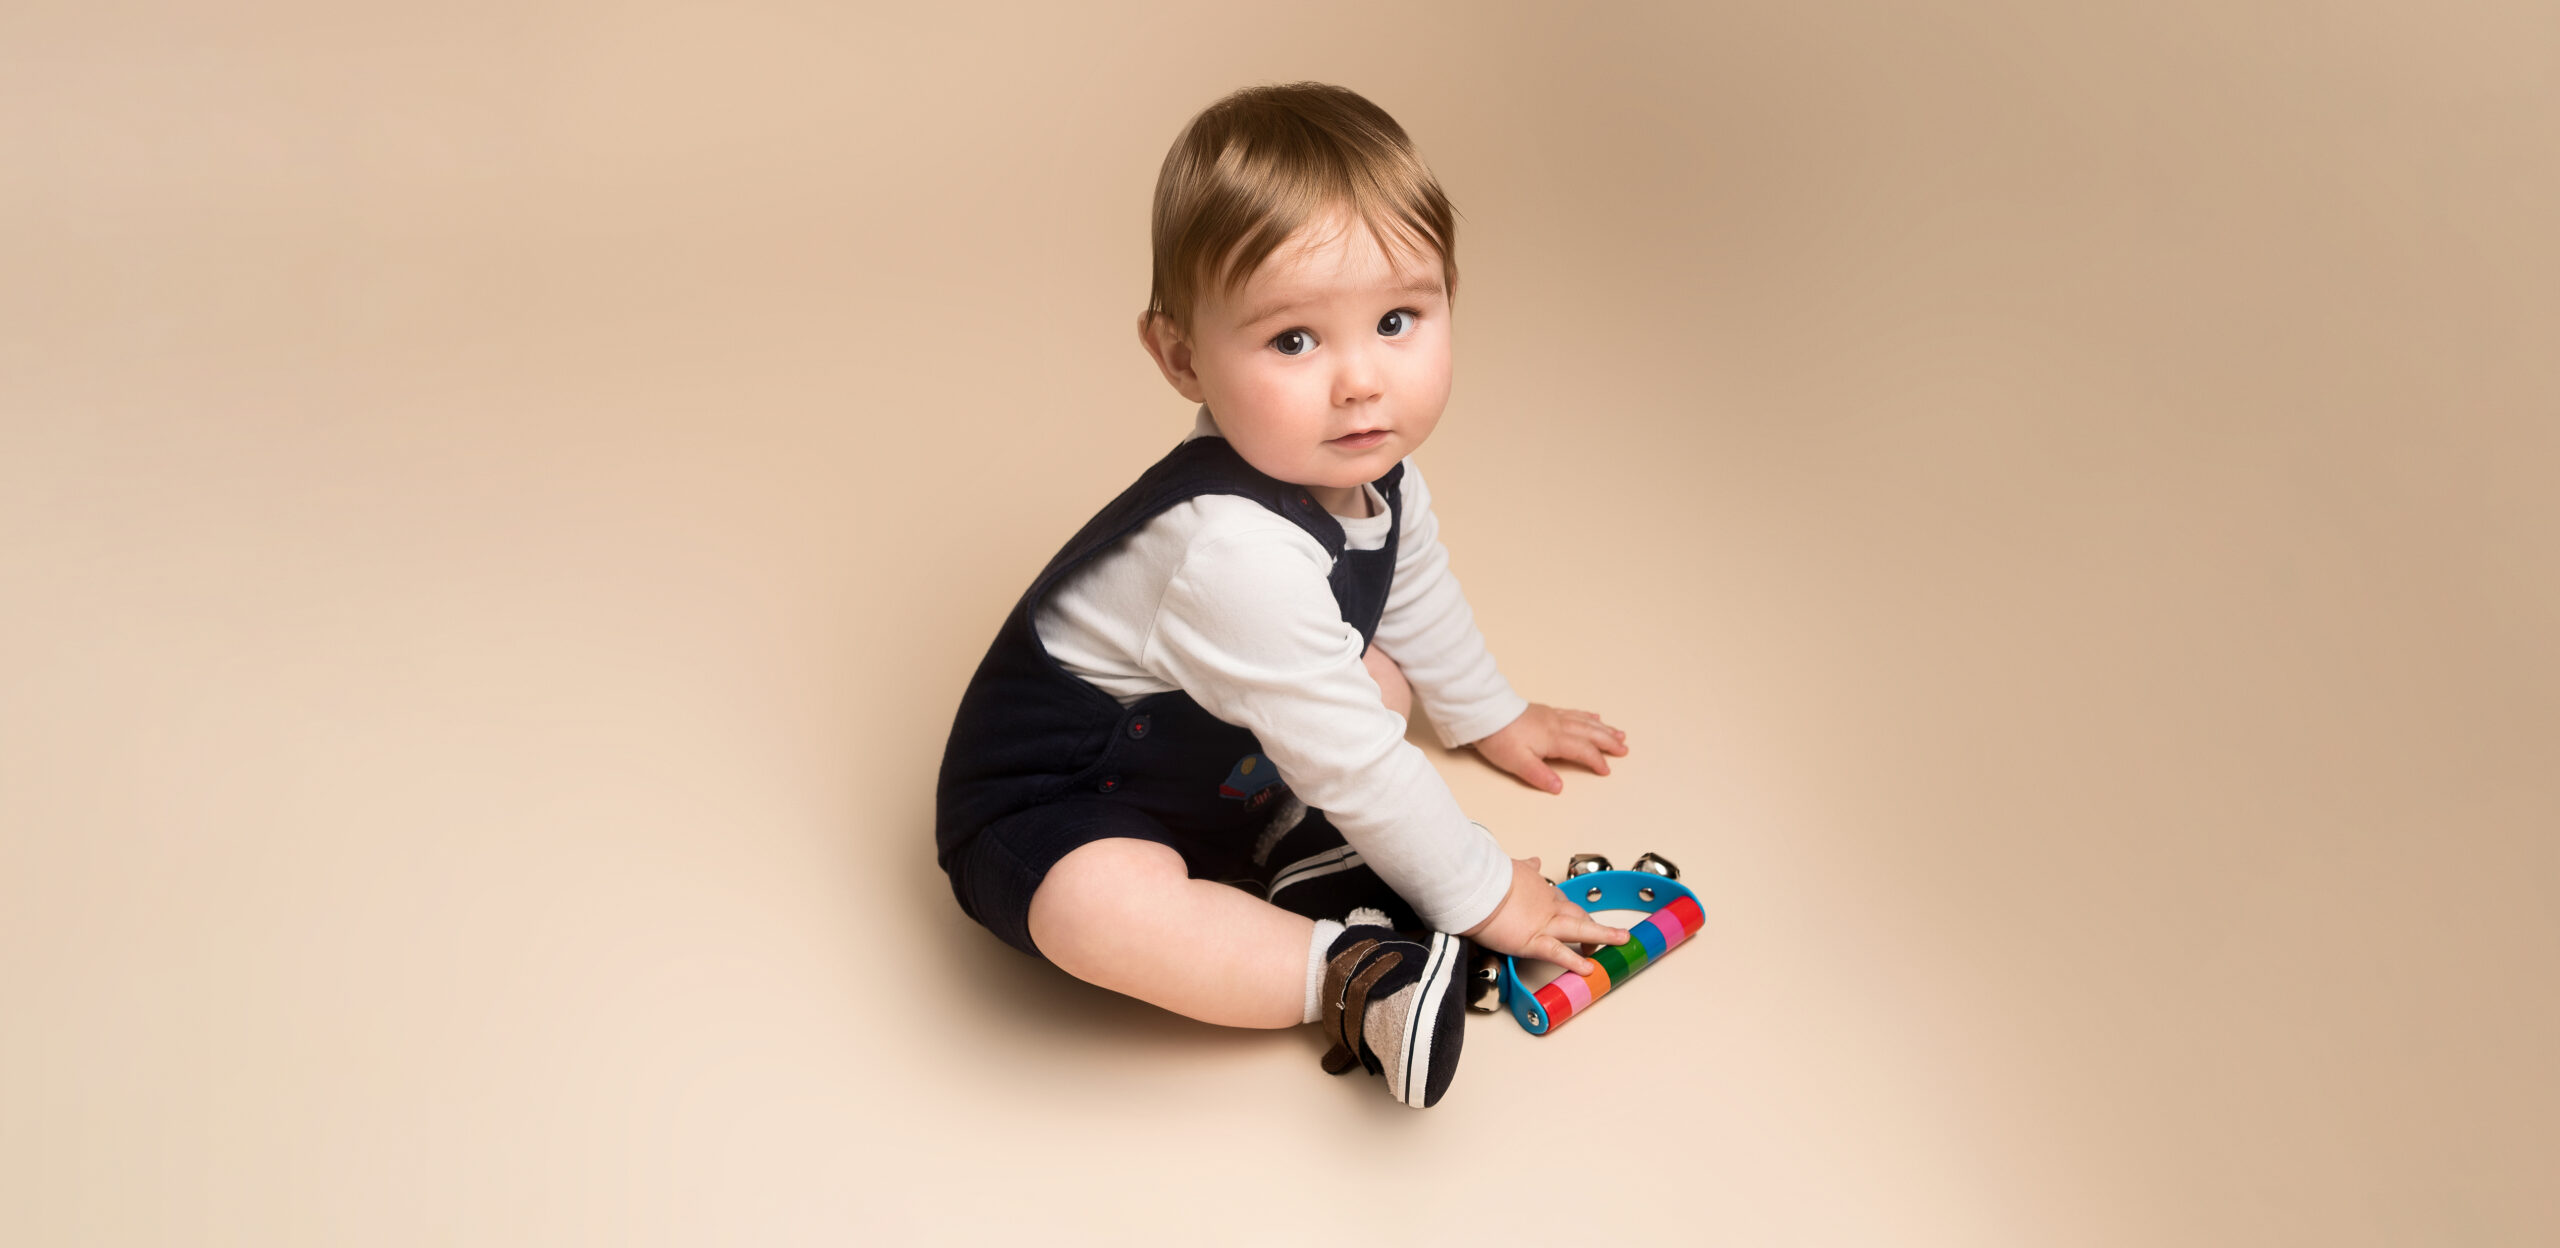 Baby boy playing with a rattle bell taken by Alice James Photography - baby photographer Letchworth